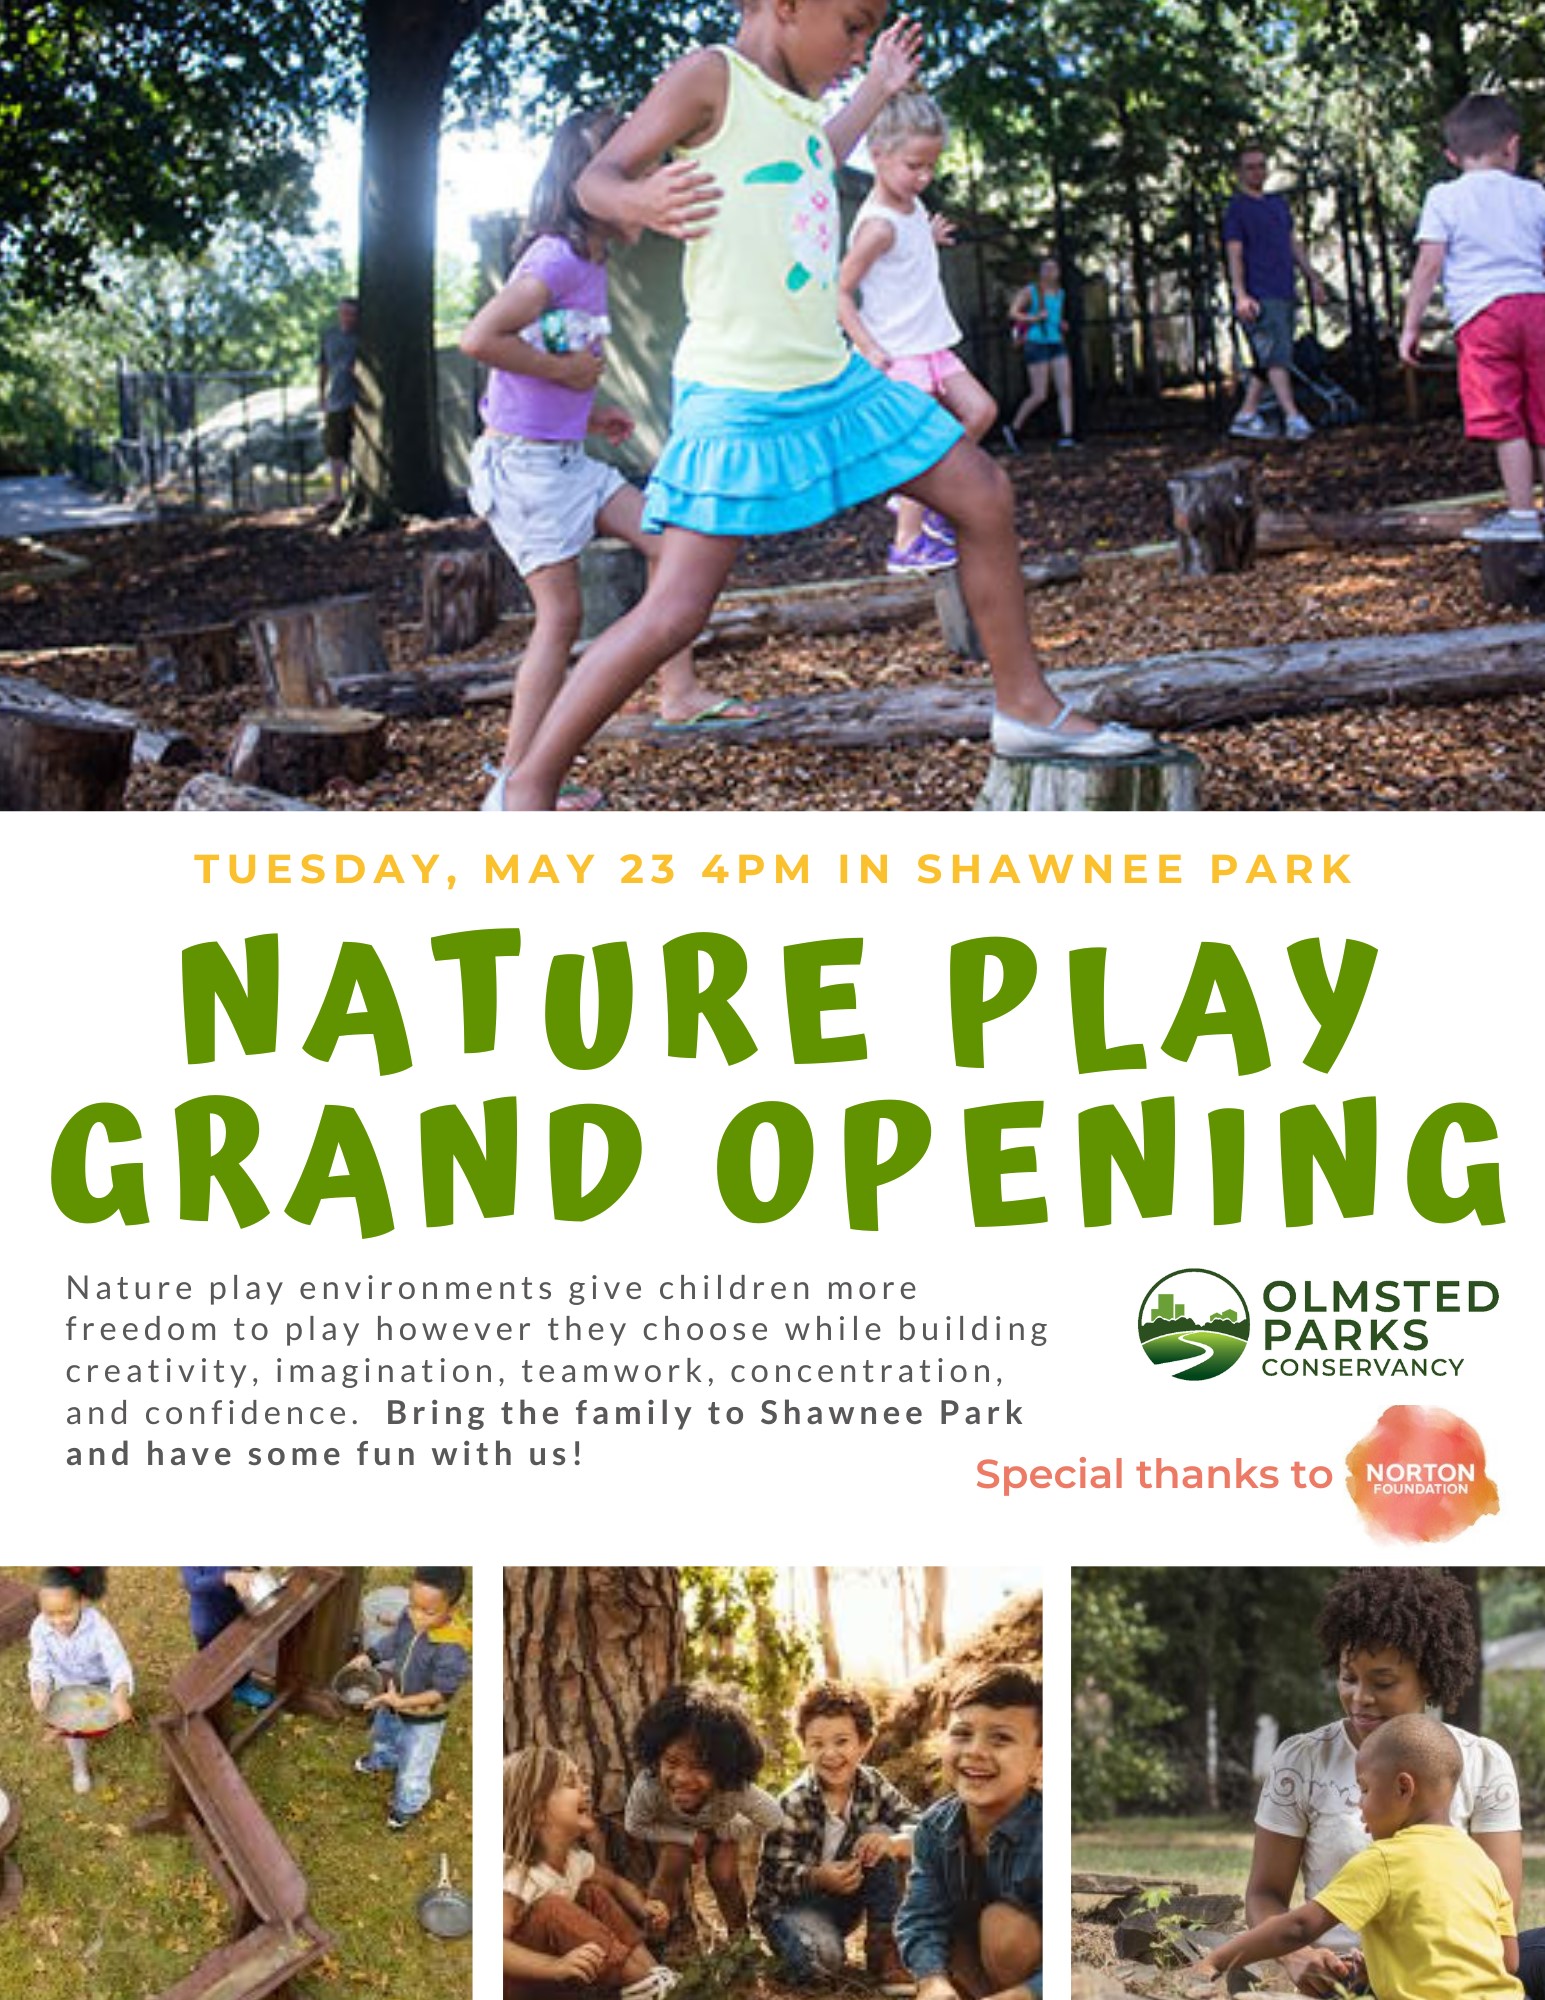 New Nature Play Area Opens at Shawnee Park